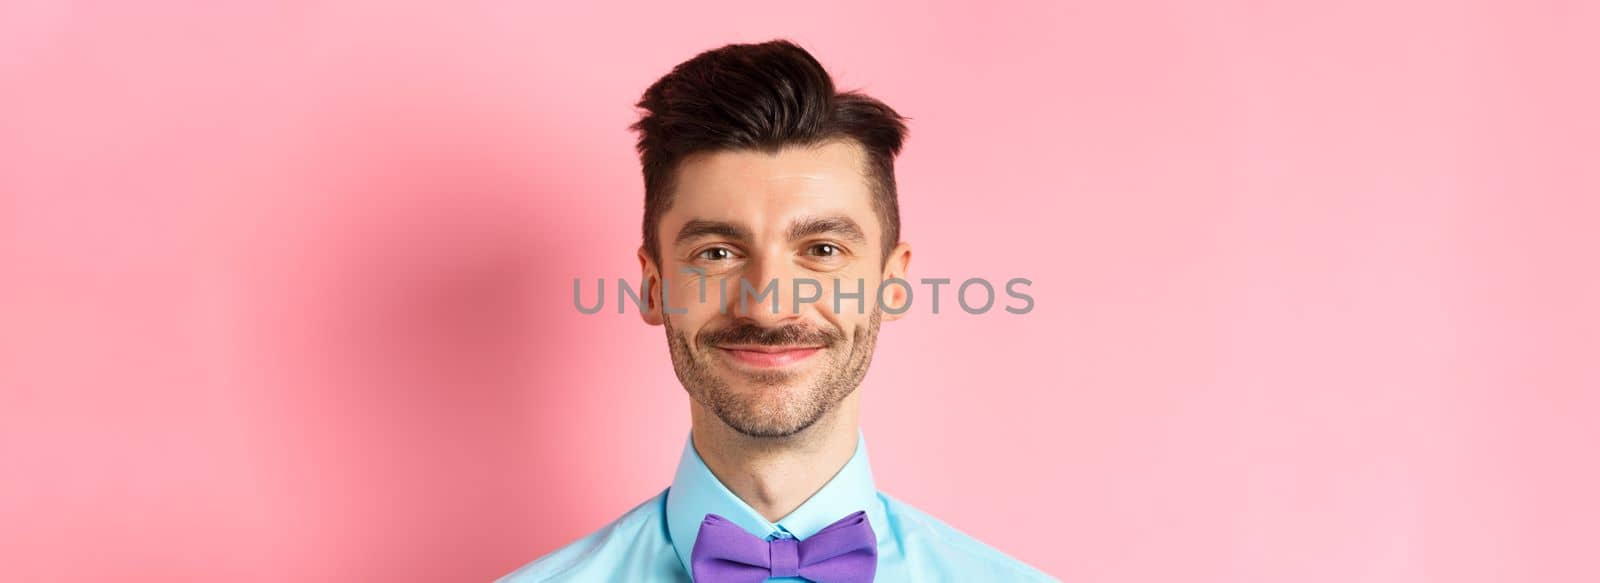 Close-up of smiling hansome man with moustache, wearing bow-tie and shirt, standing cheerful on pink background.